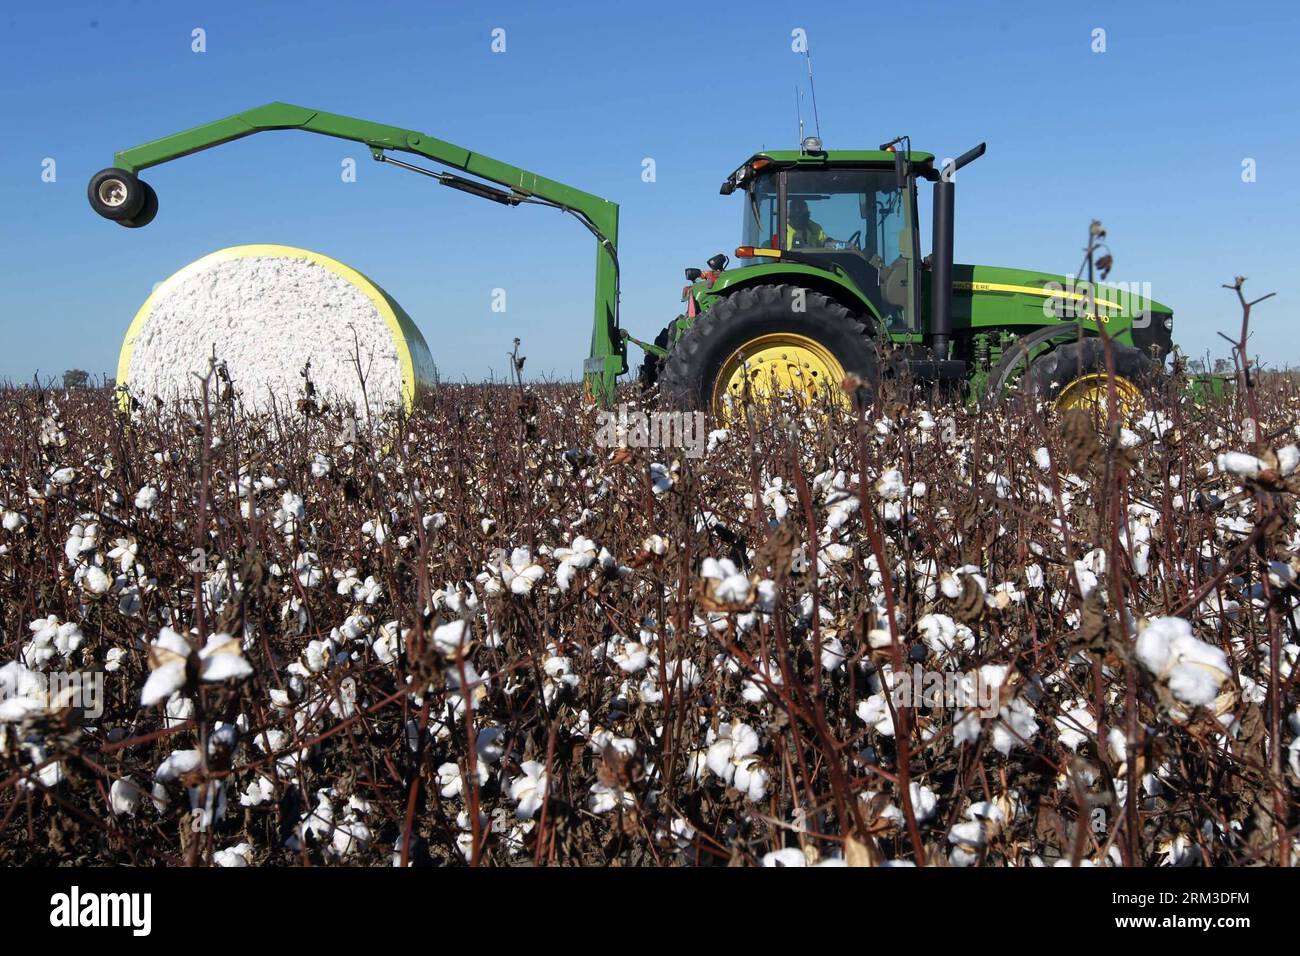 Bildnummer: 60154767  Datum: 17.07.2013  Copyright: imago/Xinhua SYDNEY, July 17 2013 - A worker drives a cotton-harvesting machine at UNIBALE, a subsidiary of Chinatex Corporation, in Moree, New South Wales, Australia, on July 17, 2013. Chinatex Corporation purchased the cotton base to plant cotton in Moree in early 1990s. The base, covering an area of 5,200 hectares, owns the anual productivity of more than 2,700,000 kg unginned cotton and provides mainly for Chinatex Corporation and partly for international market. (Xinhua/Jin Linpeng) (lr) AUSTRALIA-NEW SOUTH WALES-MOREE-CHINATEX CORP-COTT Stock Photo